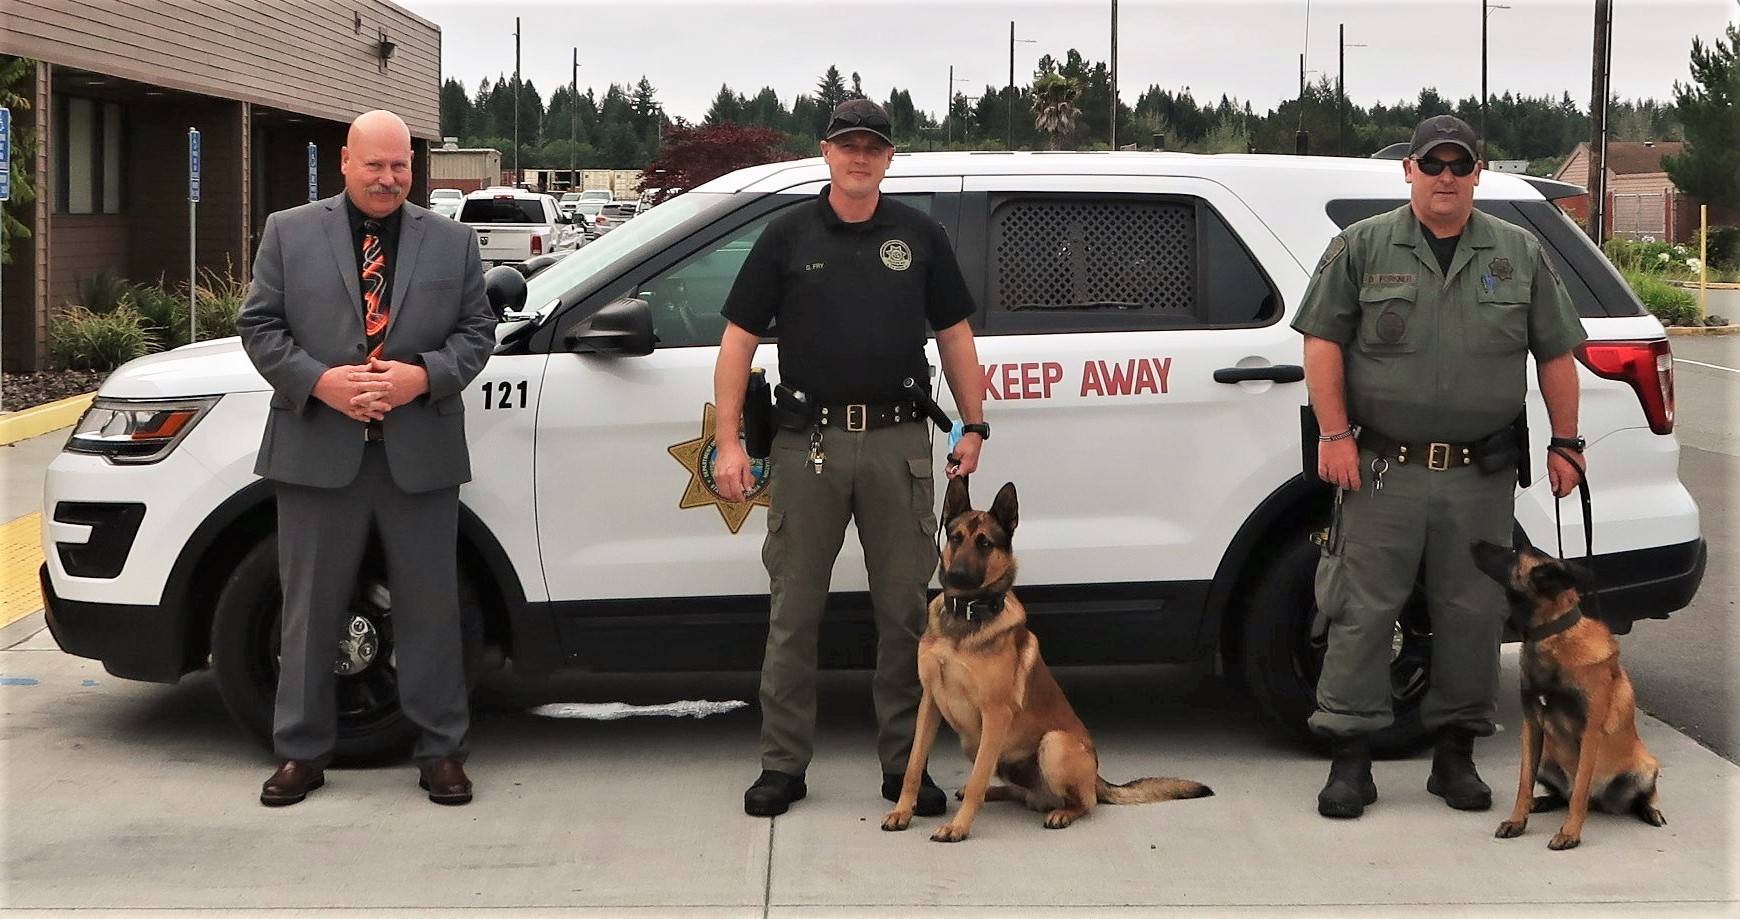 Two Pelican Bay prison K-9 officers with dogs and prison warden.